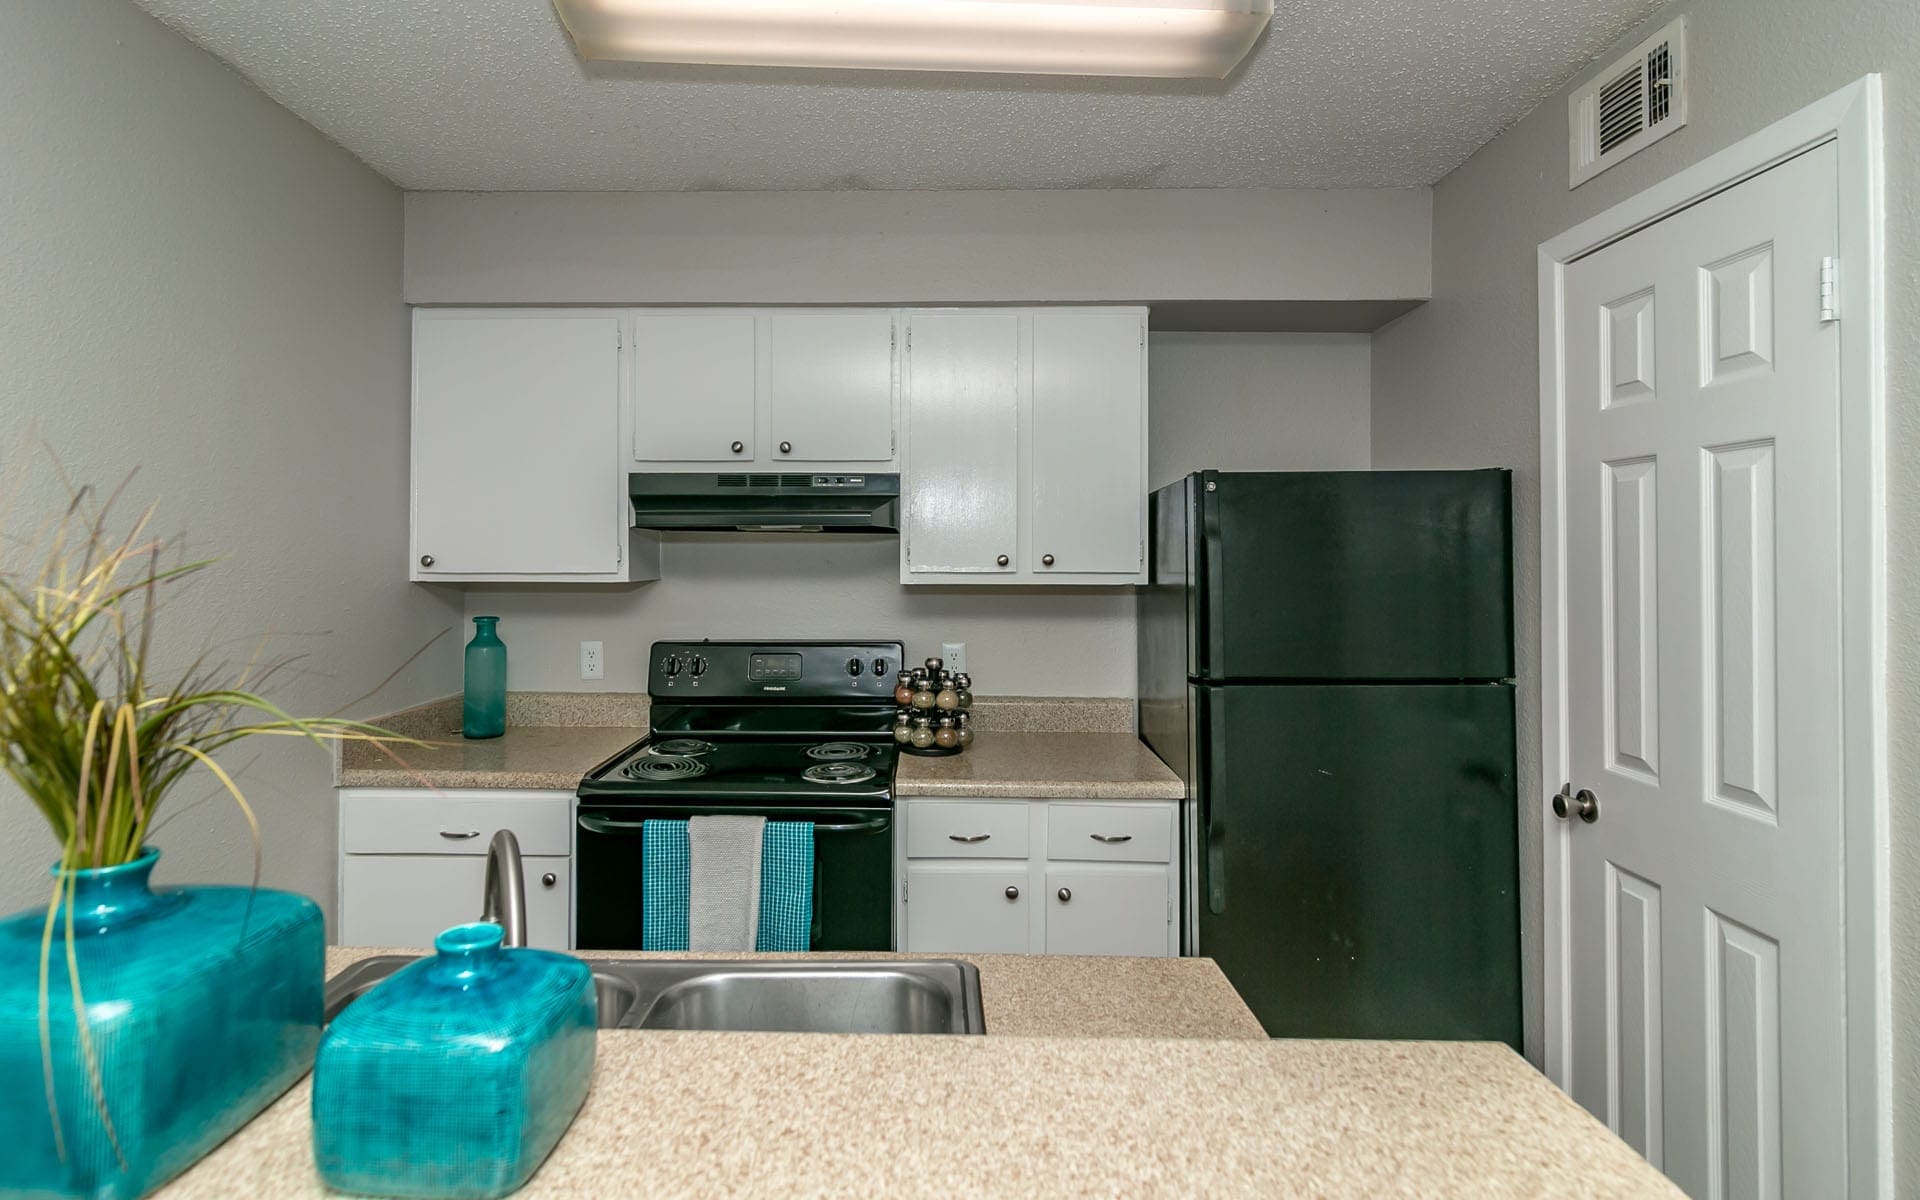 San Antonio, TX Apartments - City-Base Vista Open Concept Kitchen with Ample Cabinet Space and New Appliances